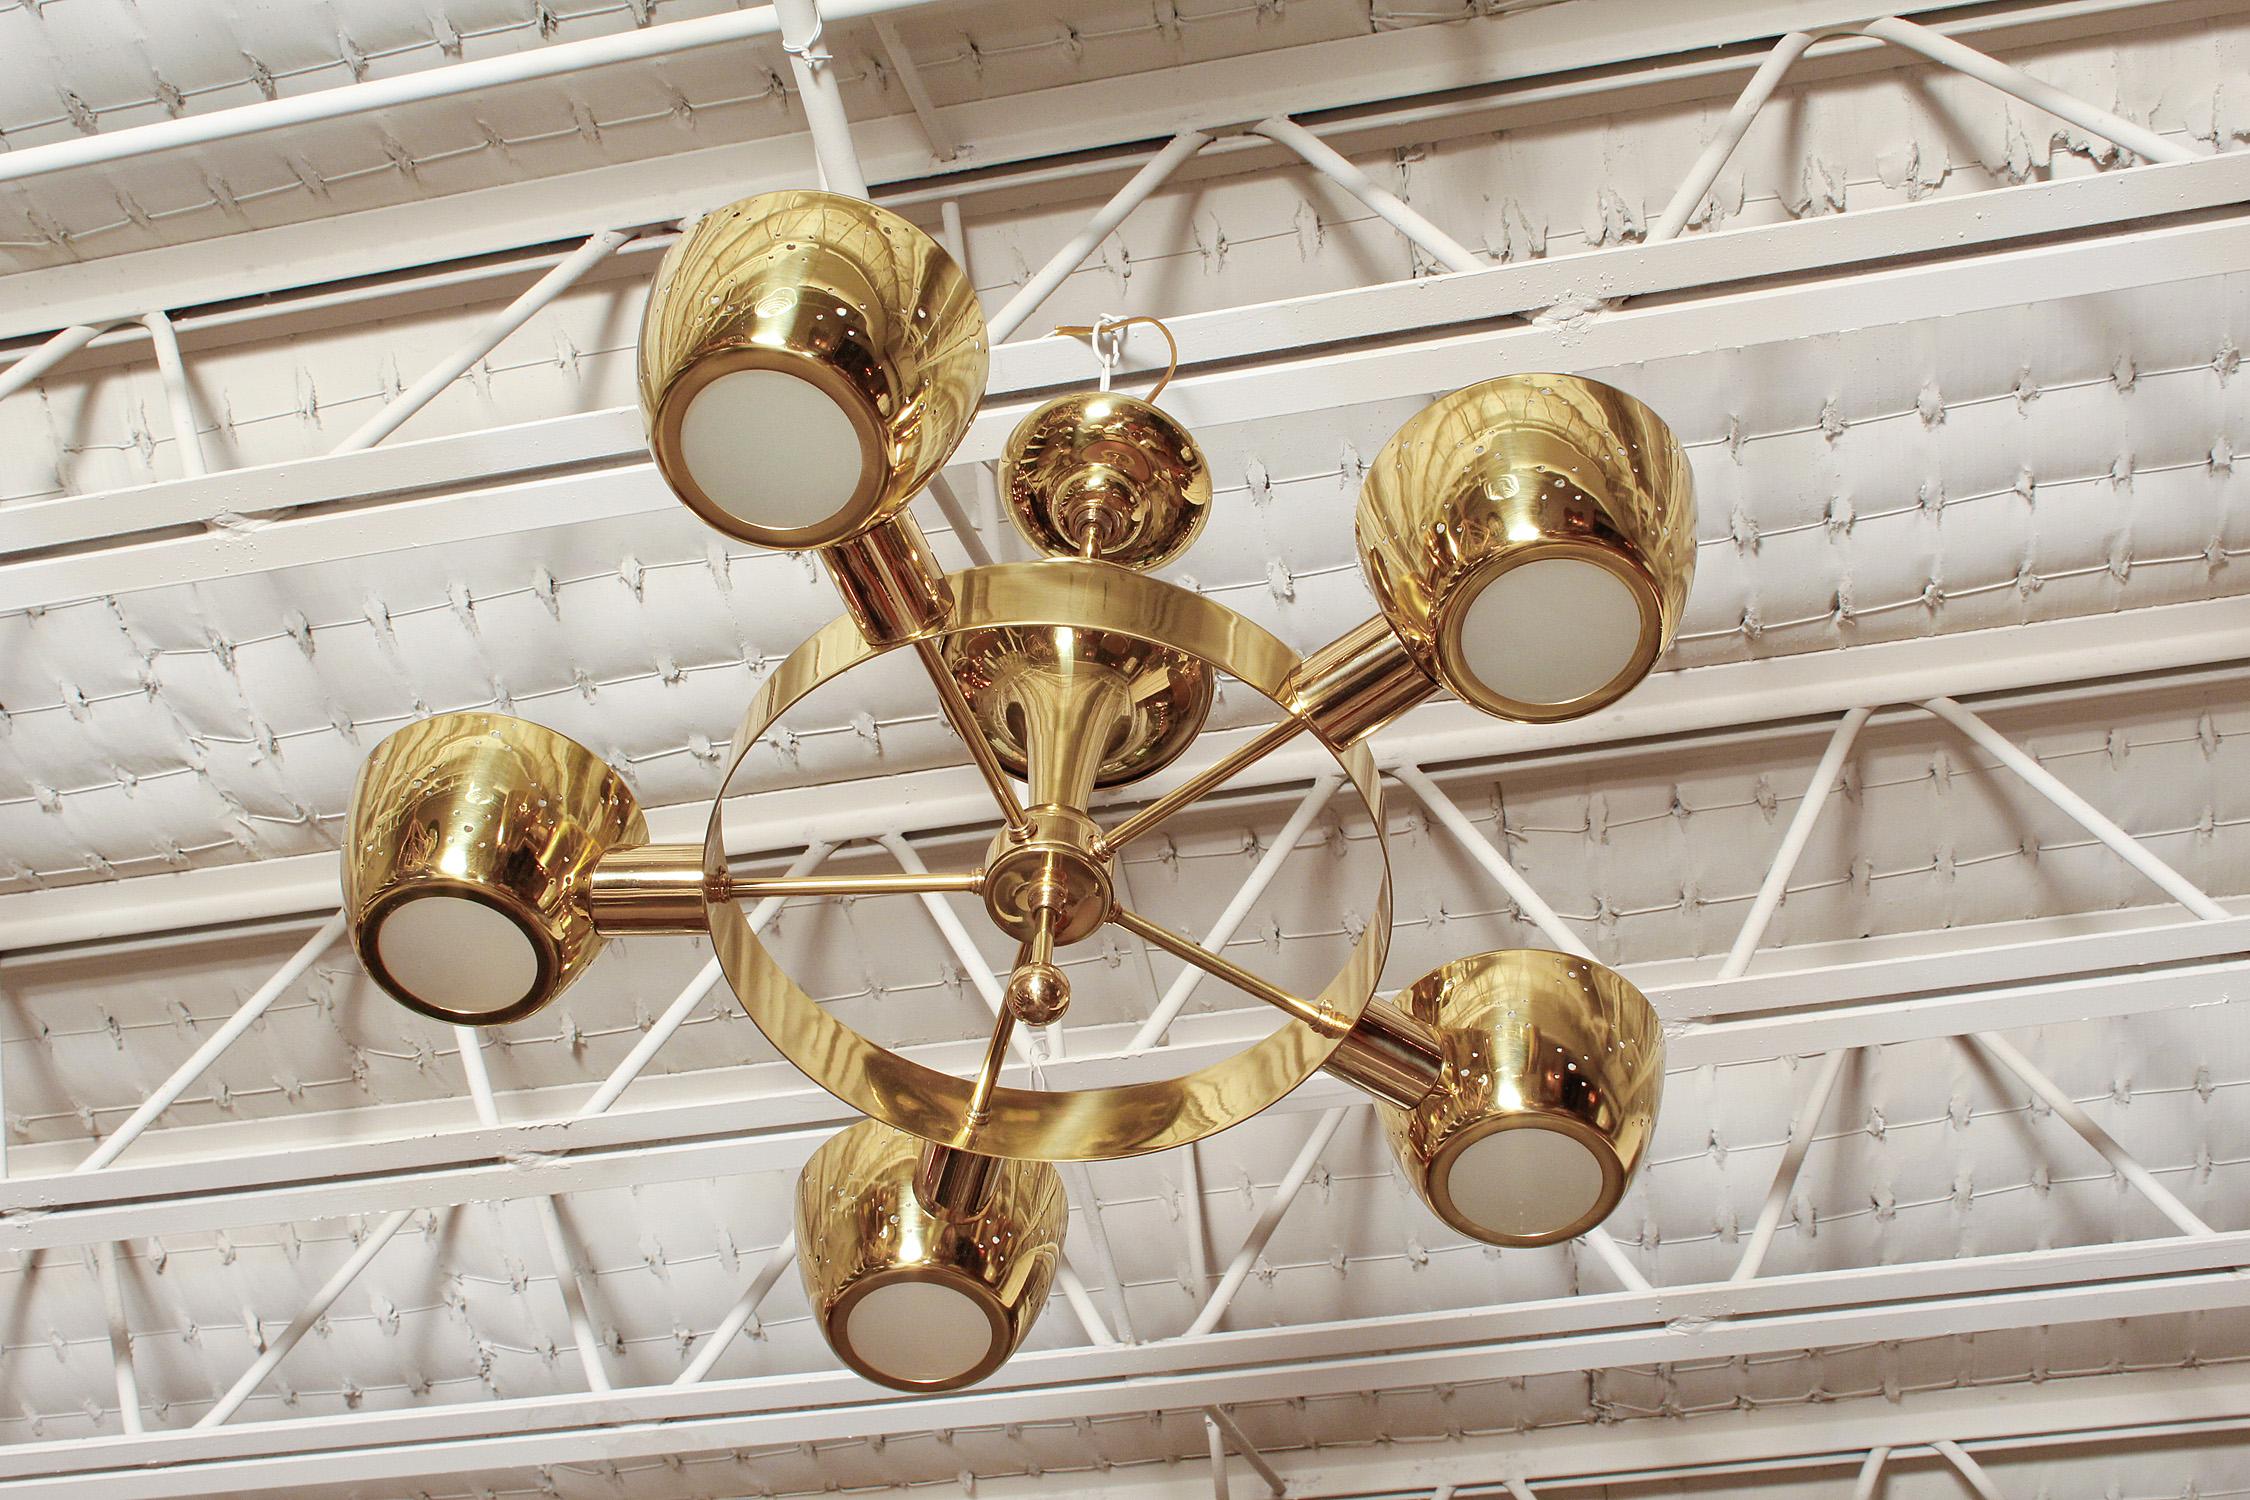 Professionally polished and rewired 1960s brass chandelier by Lightolier in the manner Gerald Thurston or Gino Sarfatti.